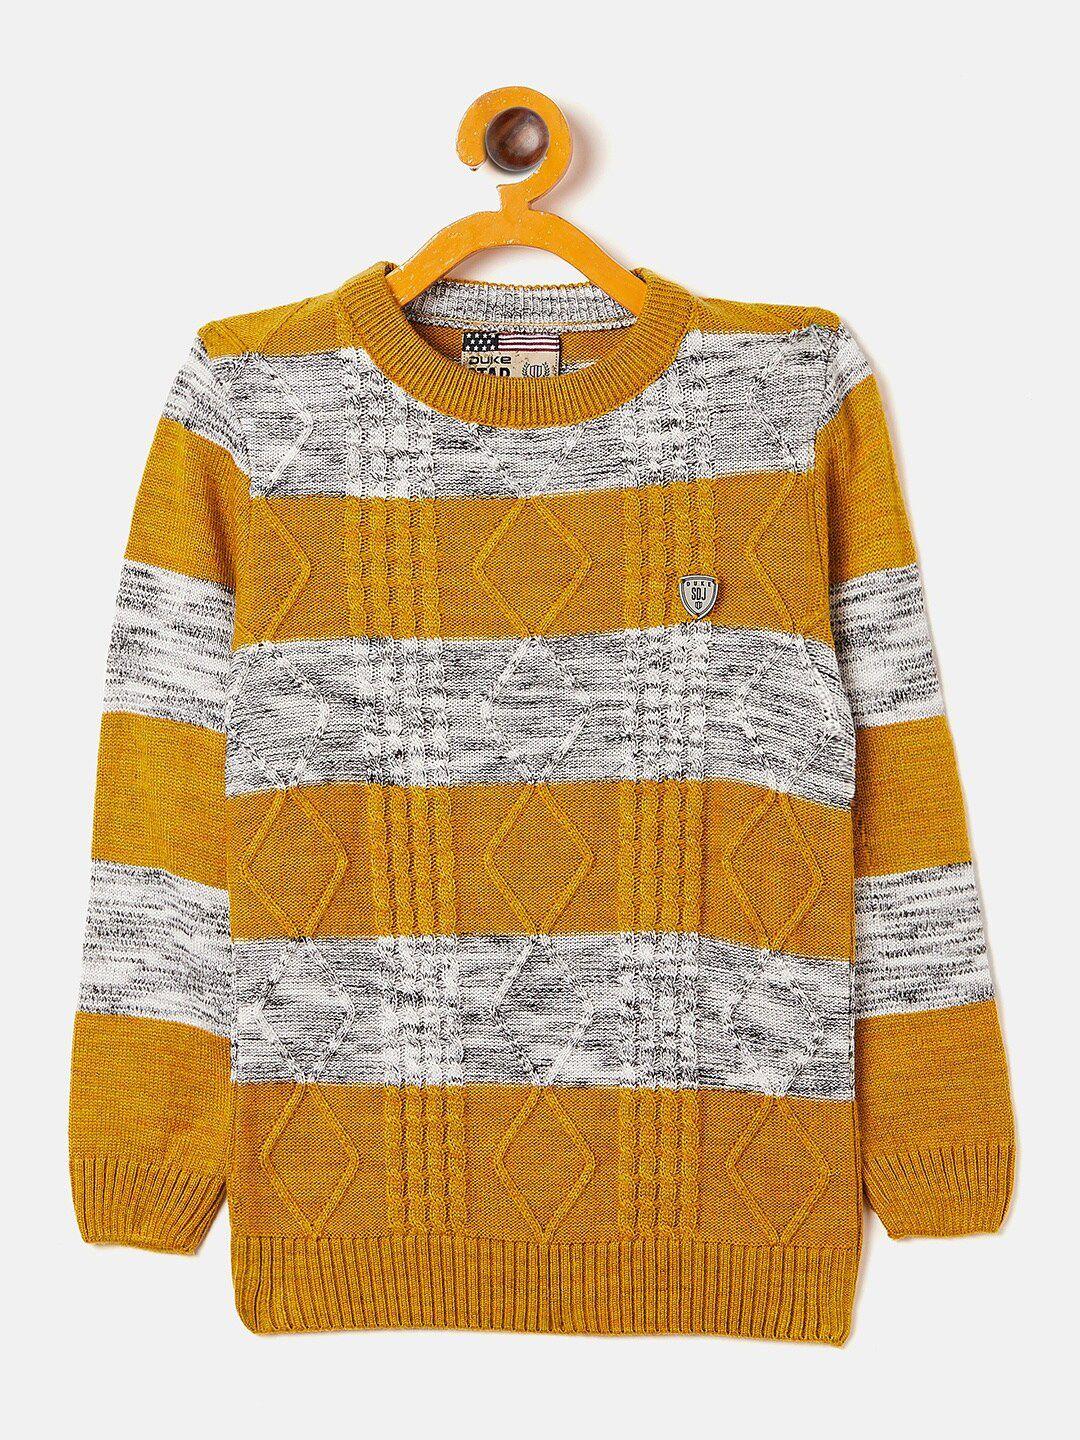 duke-boys-mustard-yellow-&-grey-cable-knit-pullover